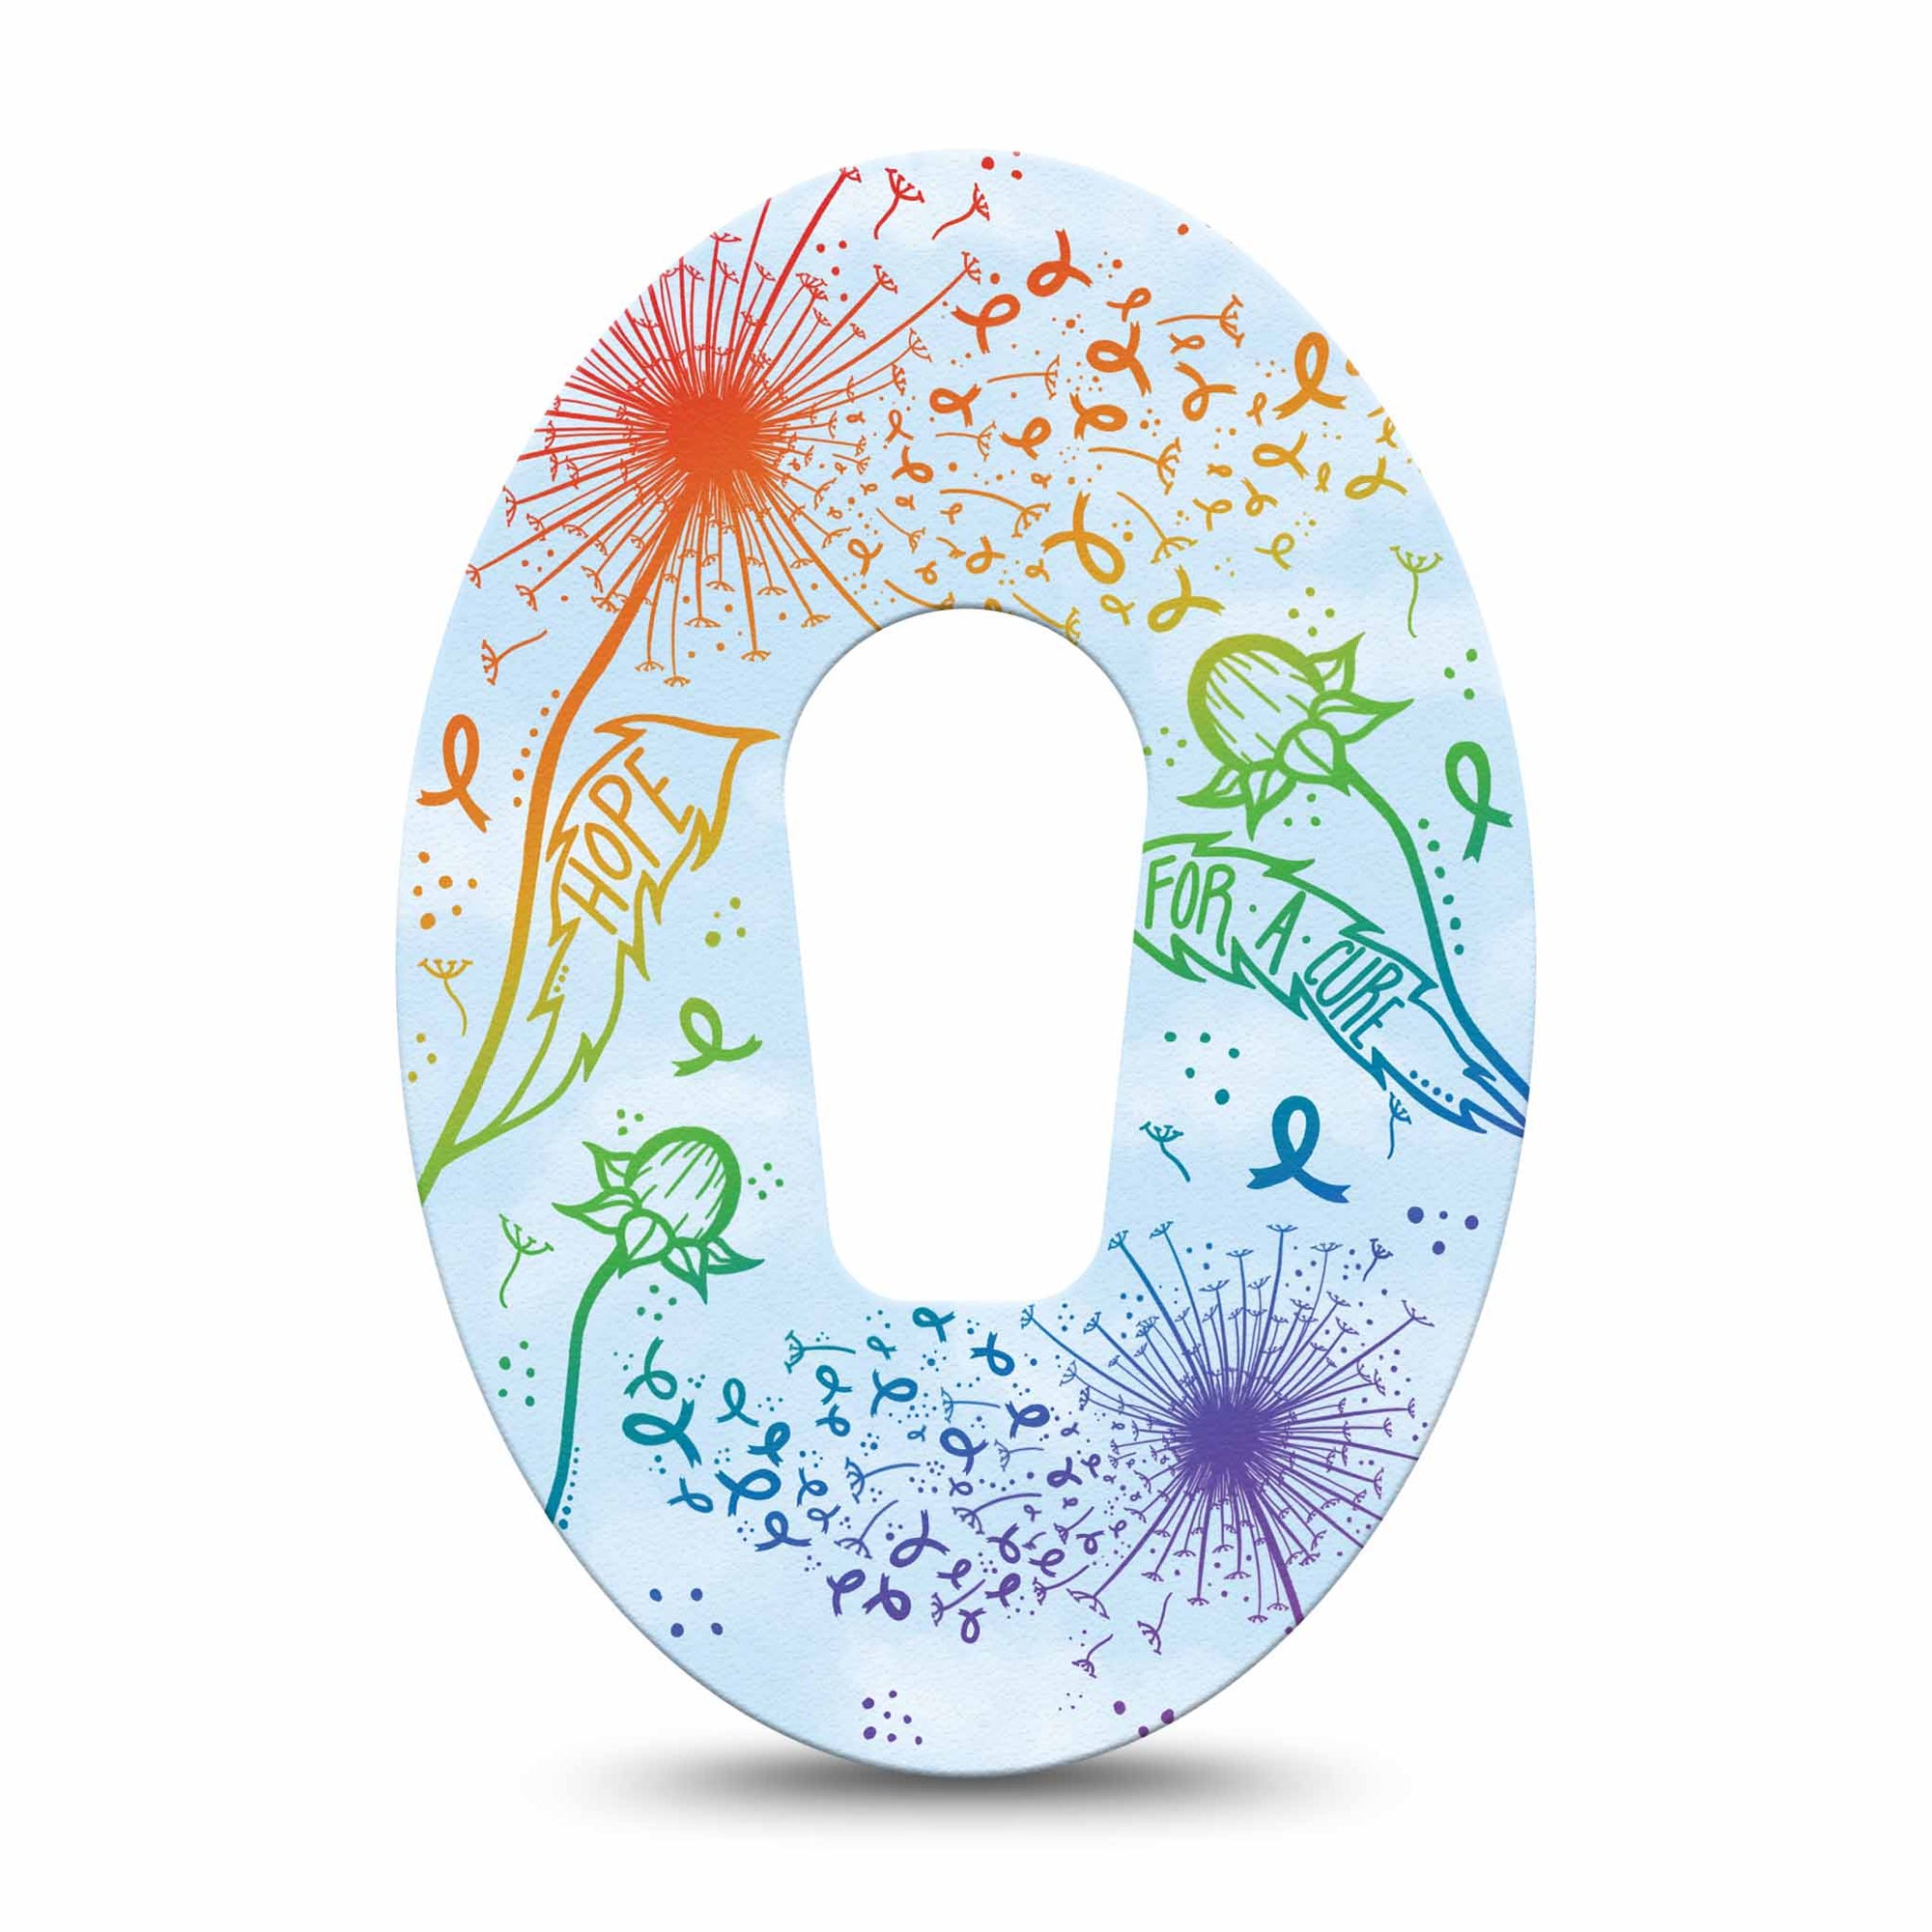 ExpressionMed Rainbow Dandelion Dexcom G6 Patch, single, Hope for a cure CGM tape design